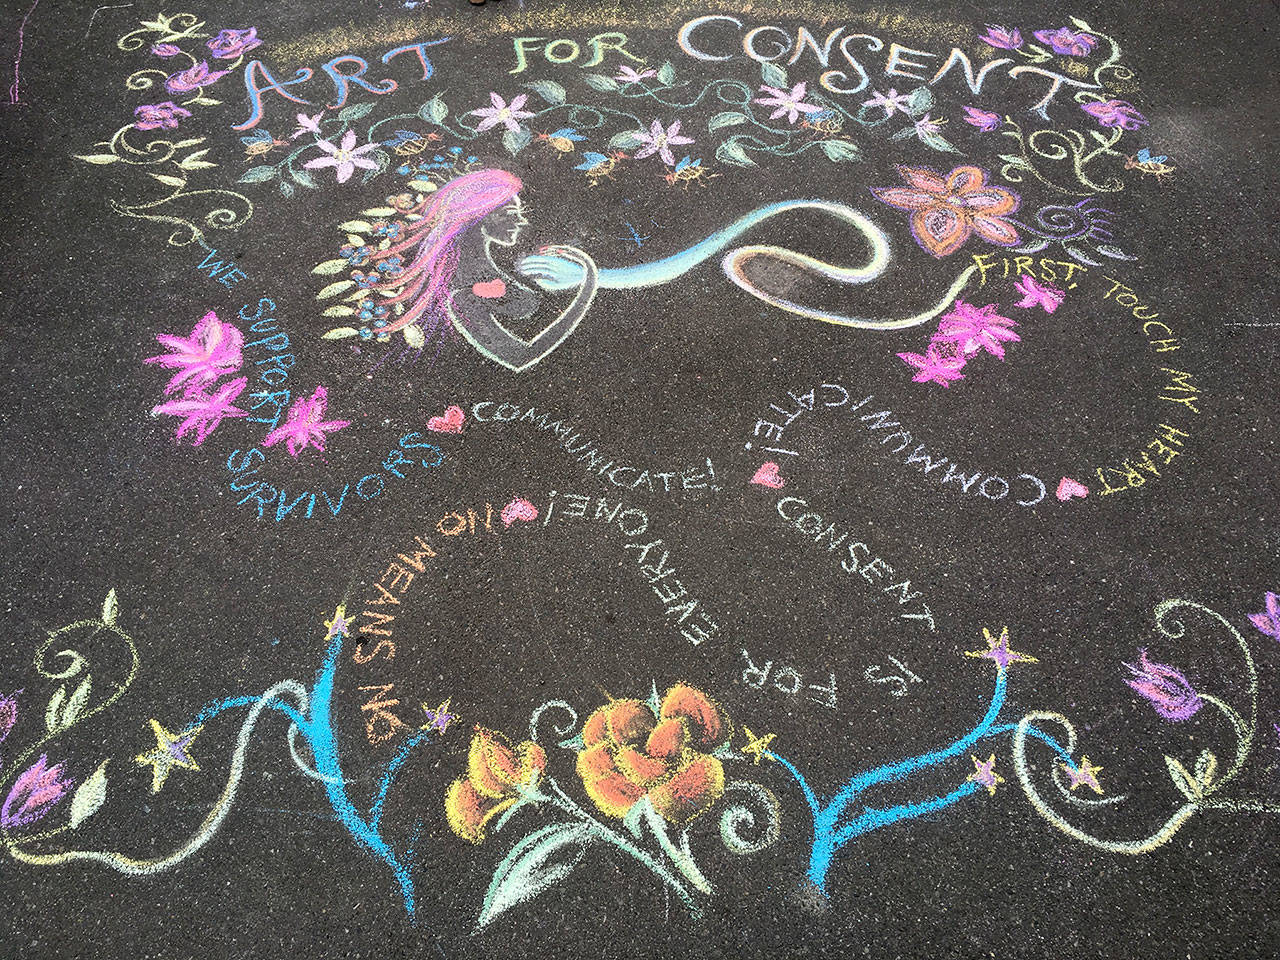 Dove House volunteers kicked off the Art for Consent event with a large chalk mural in the Dove House parking lot earlier this month. (Dove House)